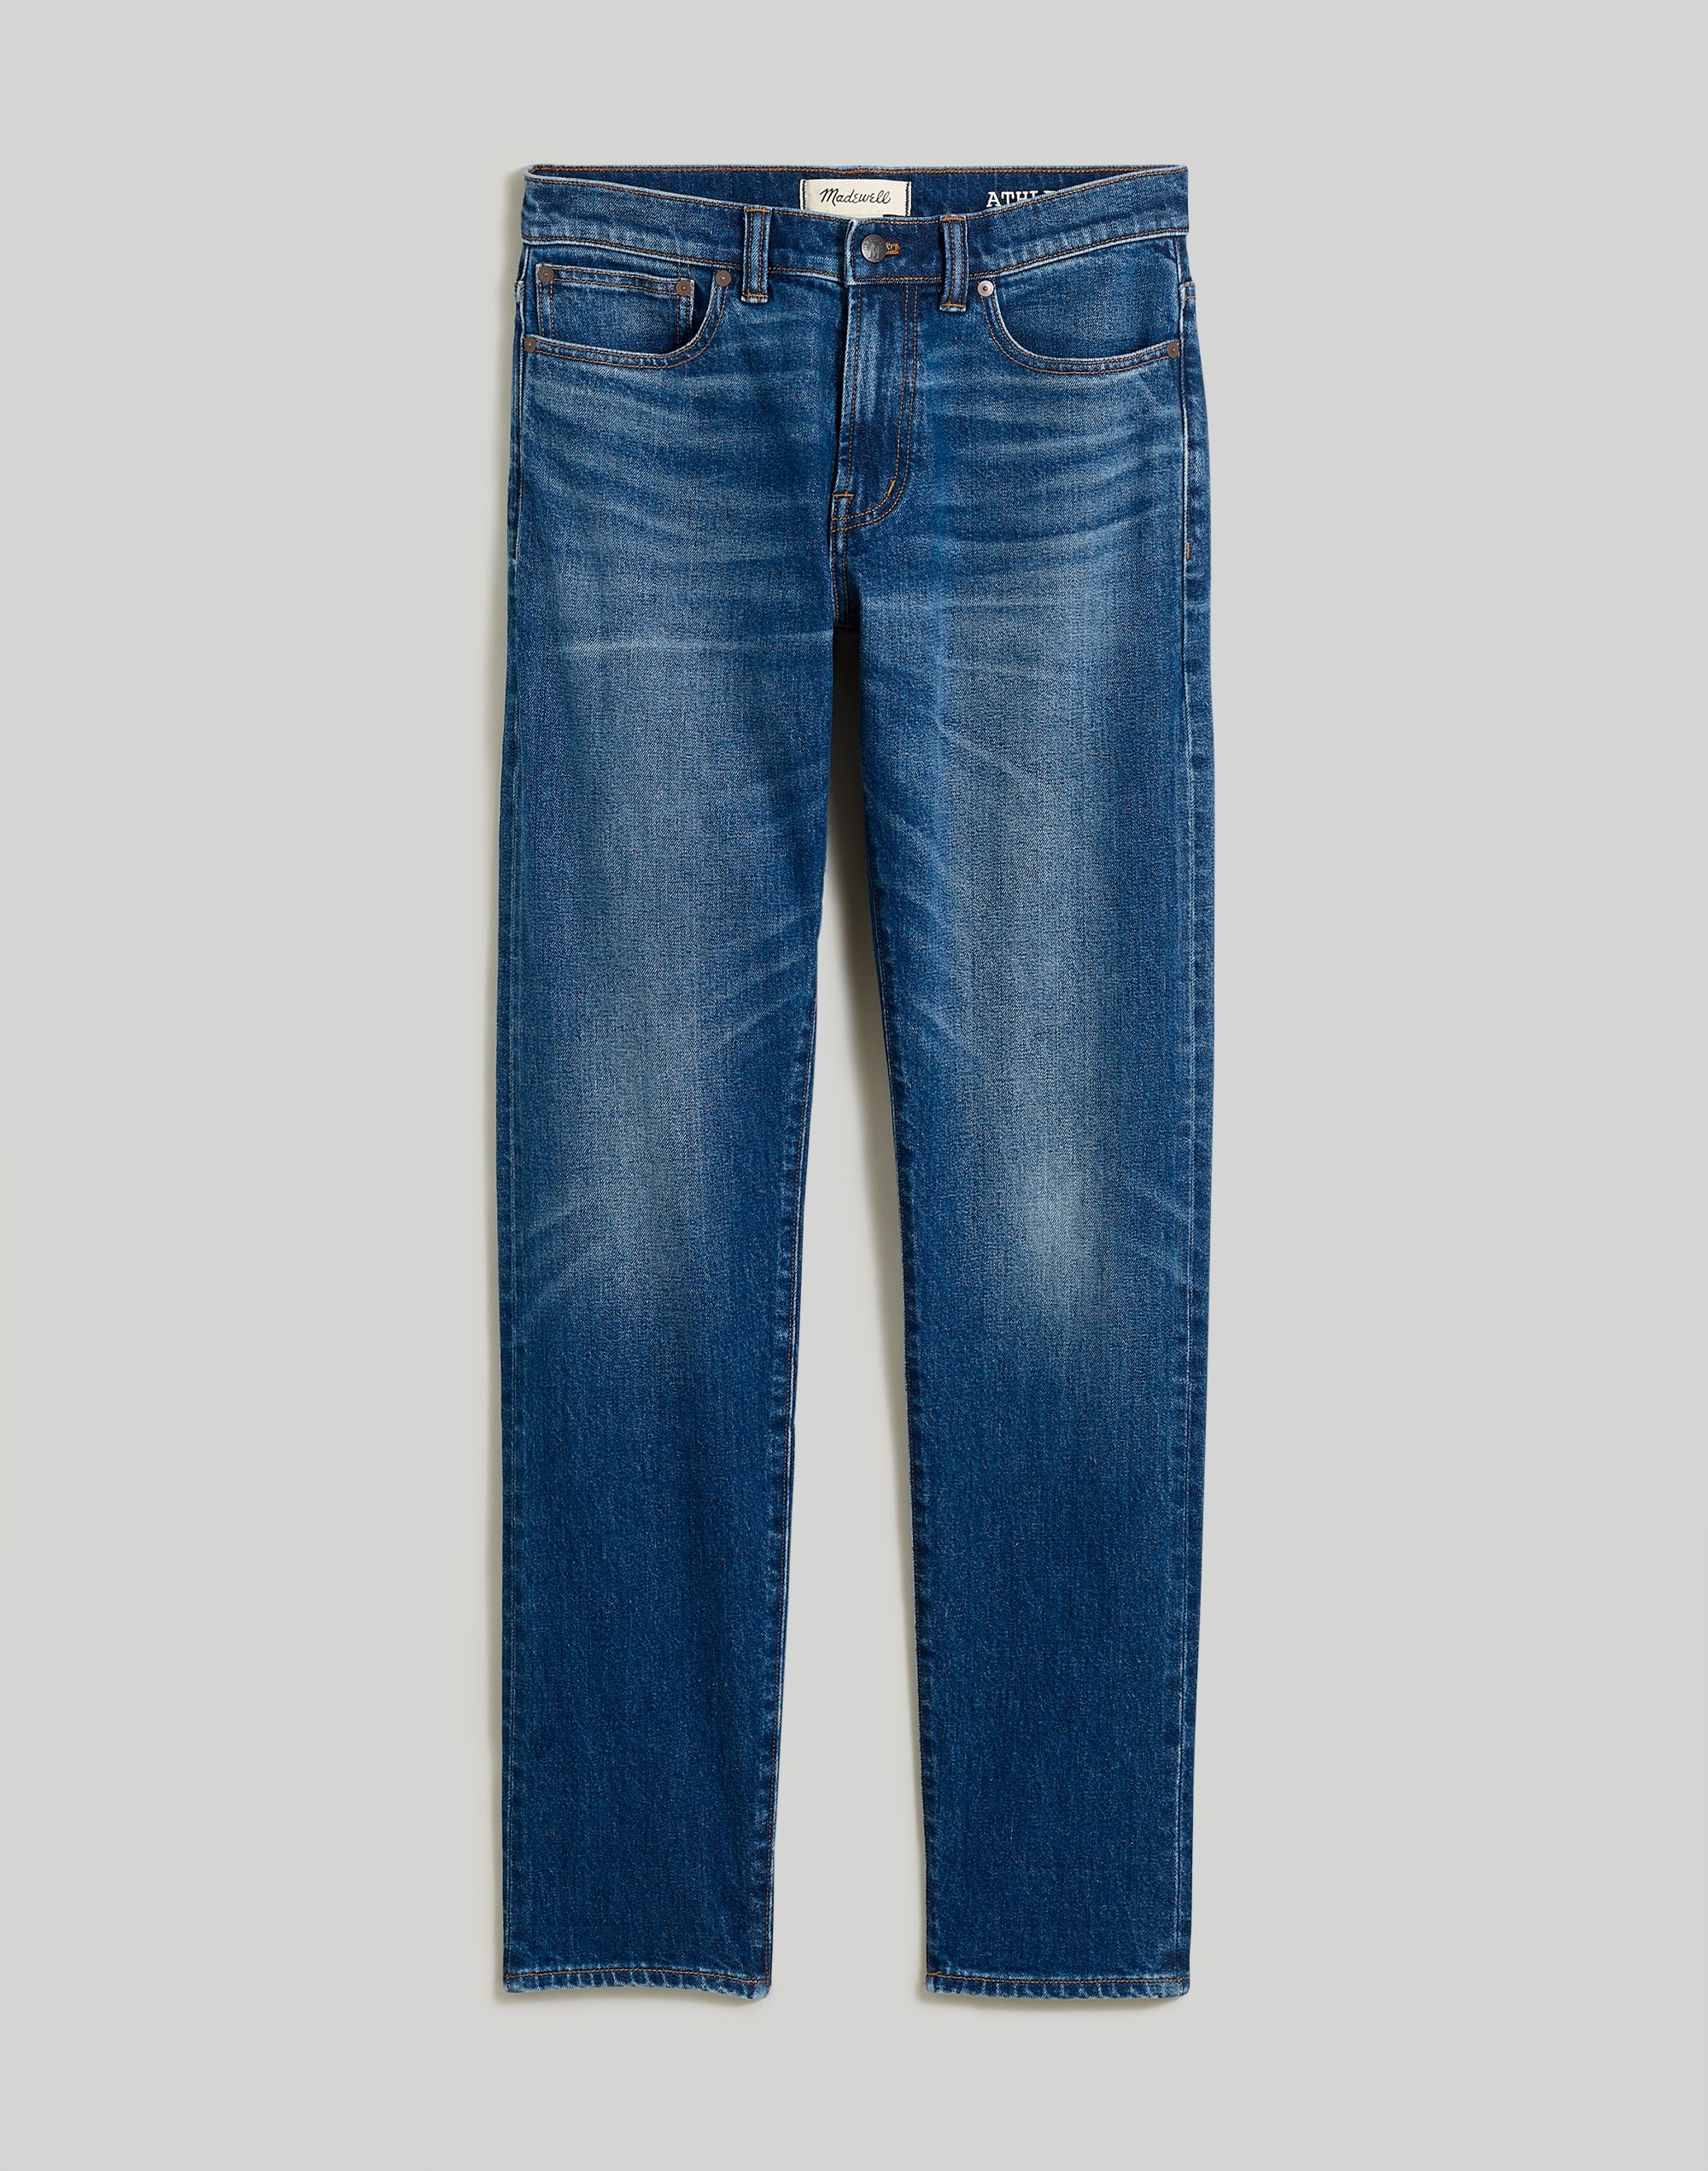 Athletic Slim Selvedge Jeans Penwood Wash: Breast Cancer Research Edition